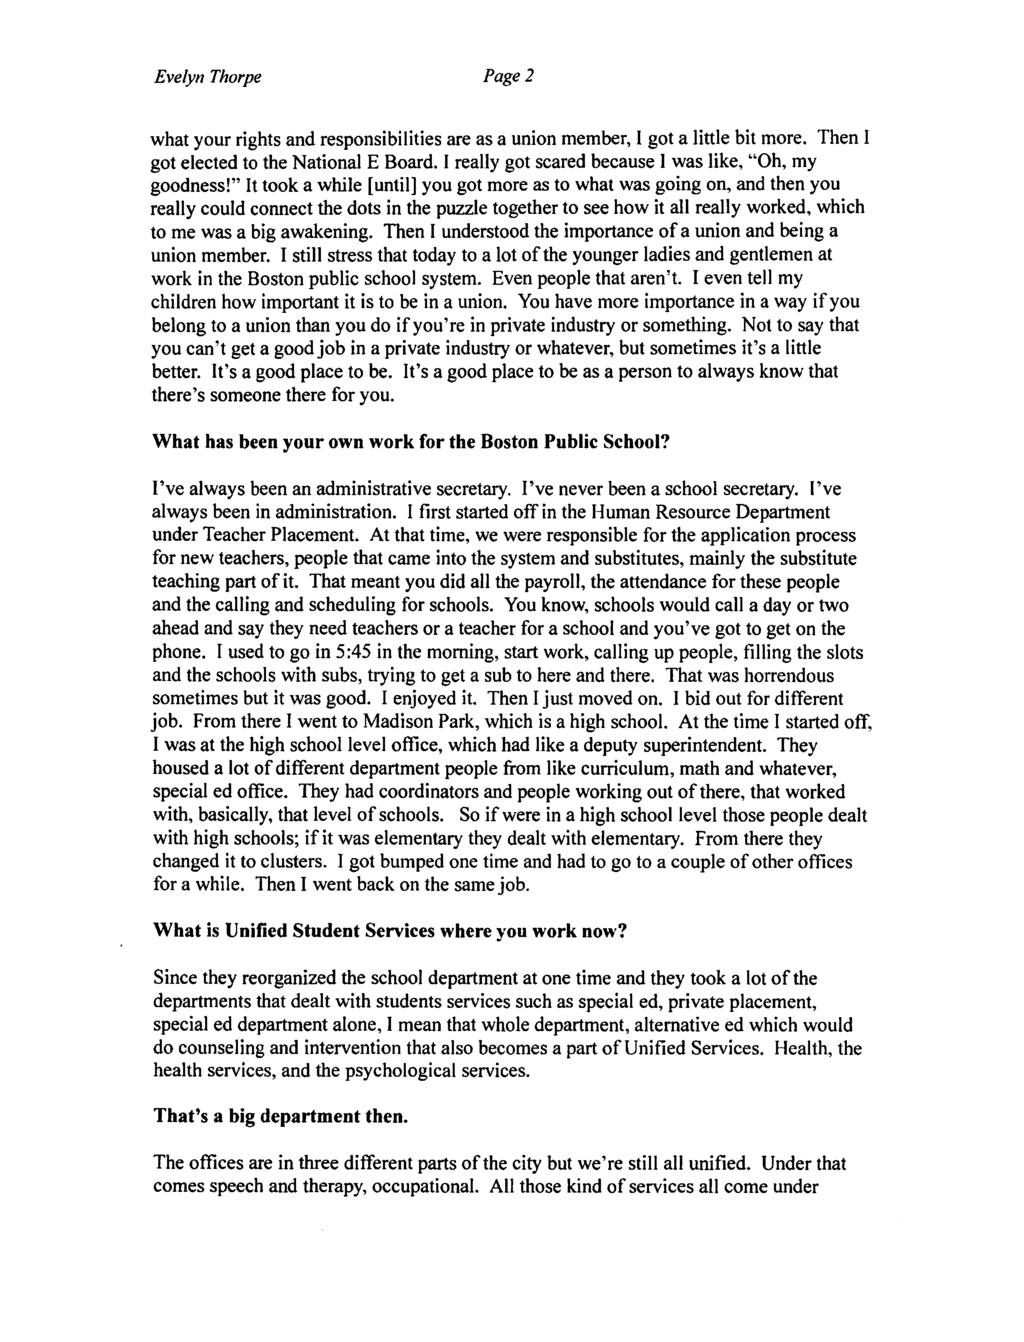 Evelyn Thorpe Page 2 what your rights and responsibilities are as a union member, I got a little bit more. Then I got elected to the National E Board.